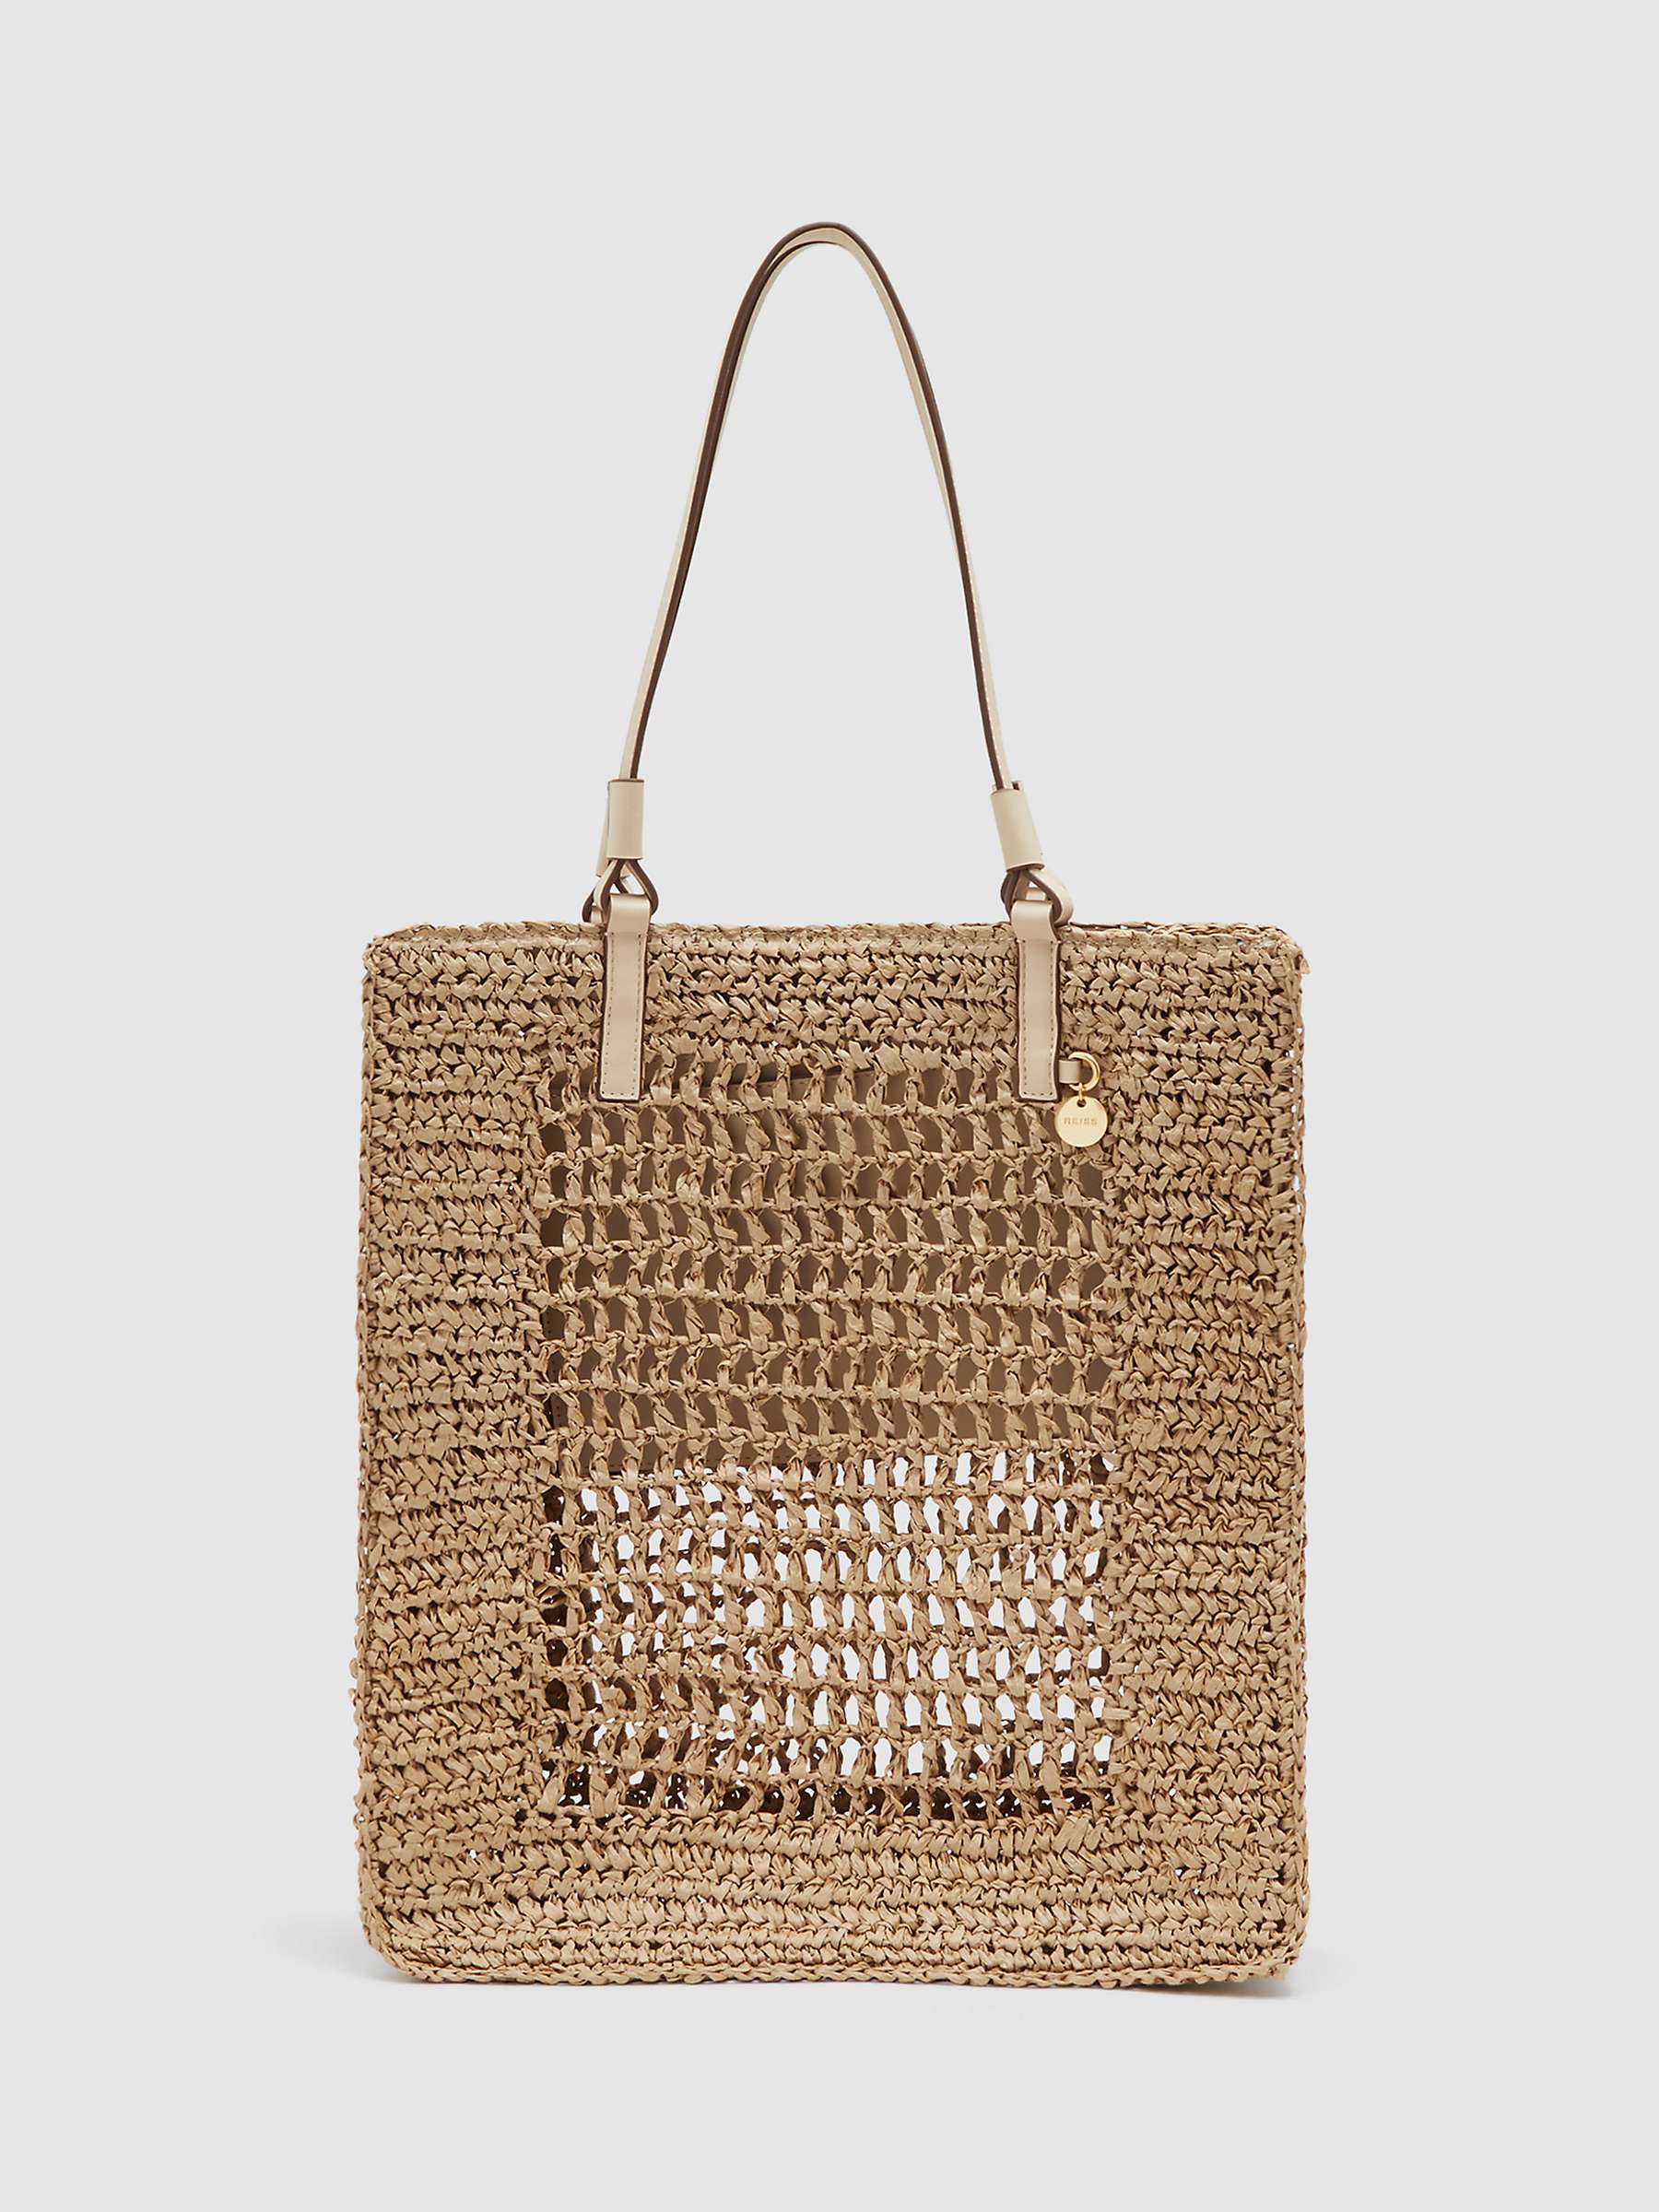 Buy Reiss Maria Woven Tote Bag, Natural Online at johnlewis.com